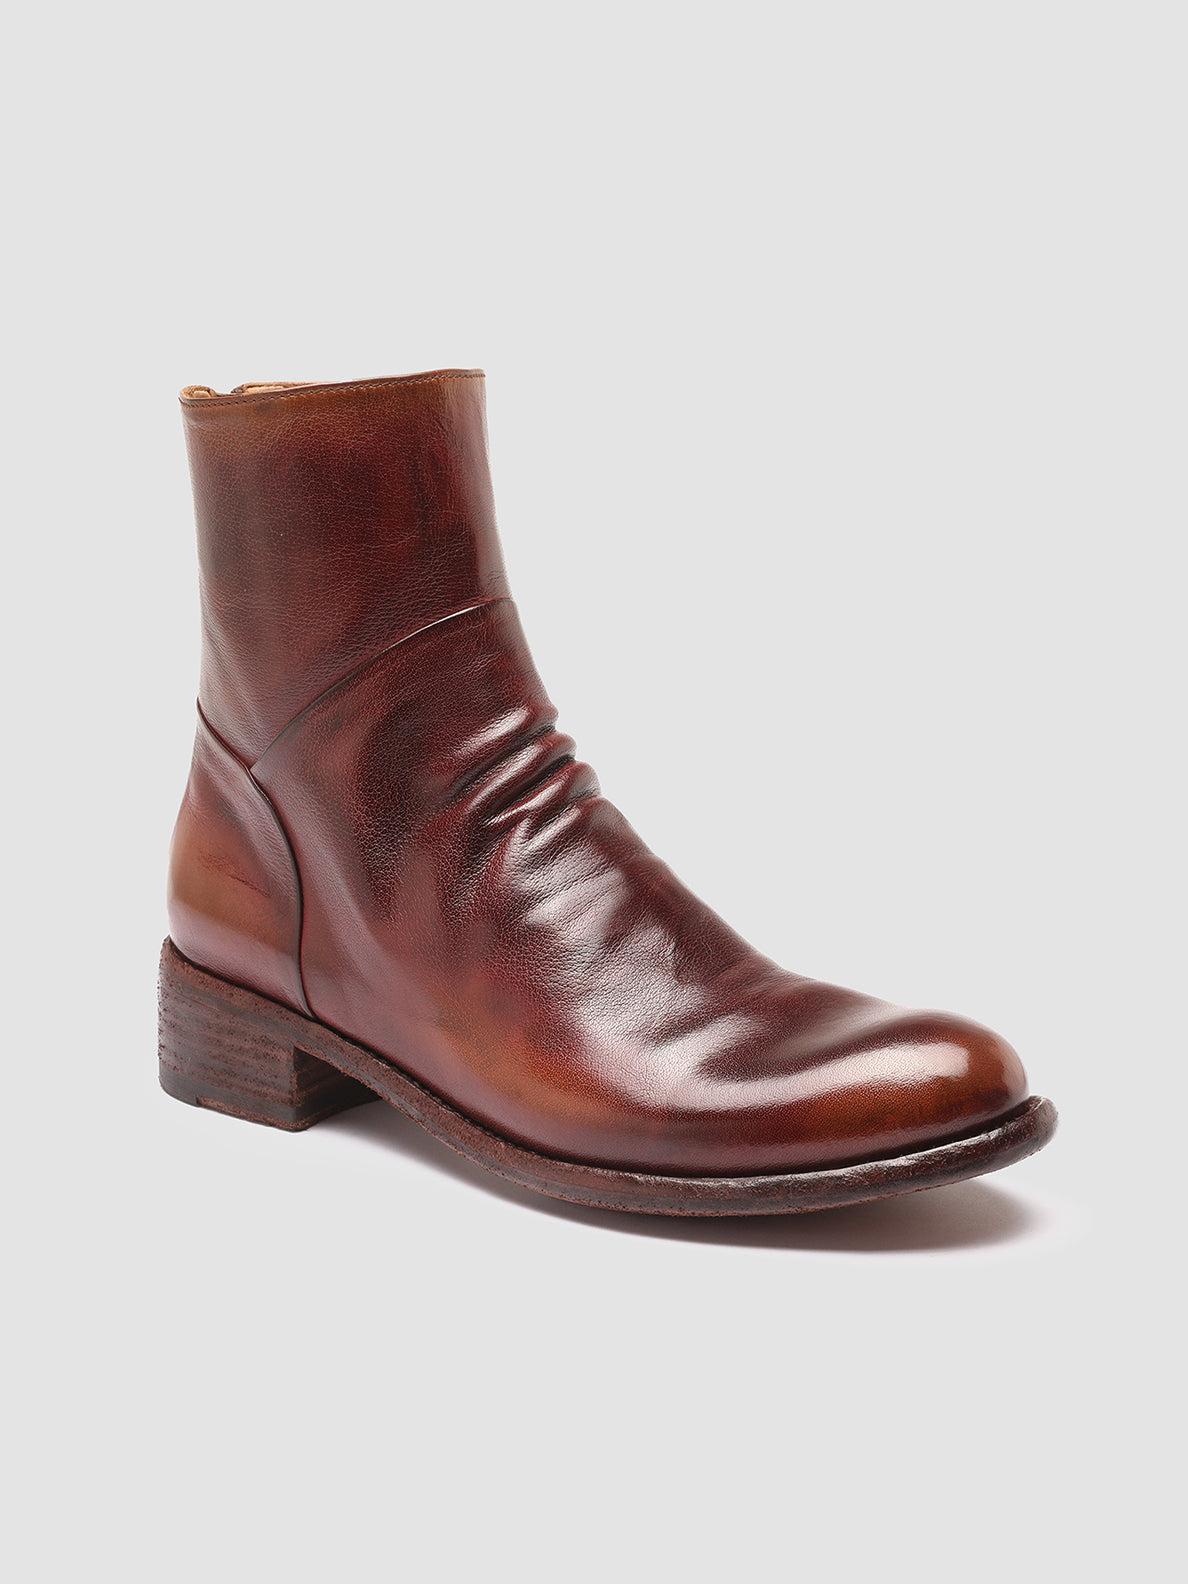 Officine Creative Lison 047 Tabacco/bordo - Leather Ankle Boots | Lyst